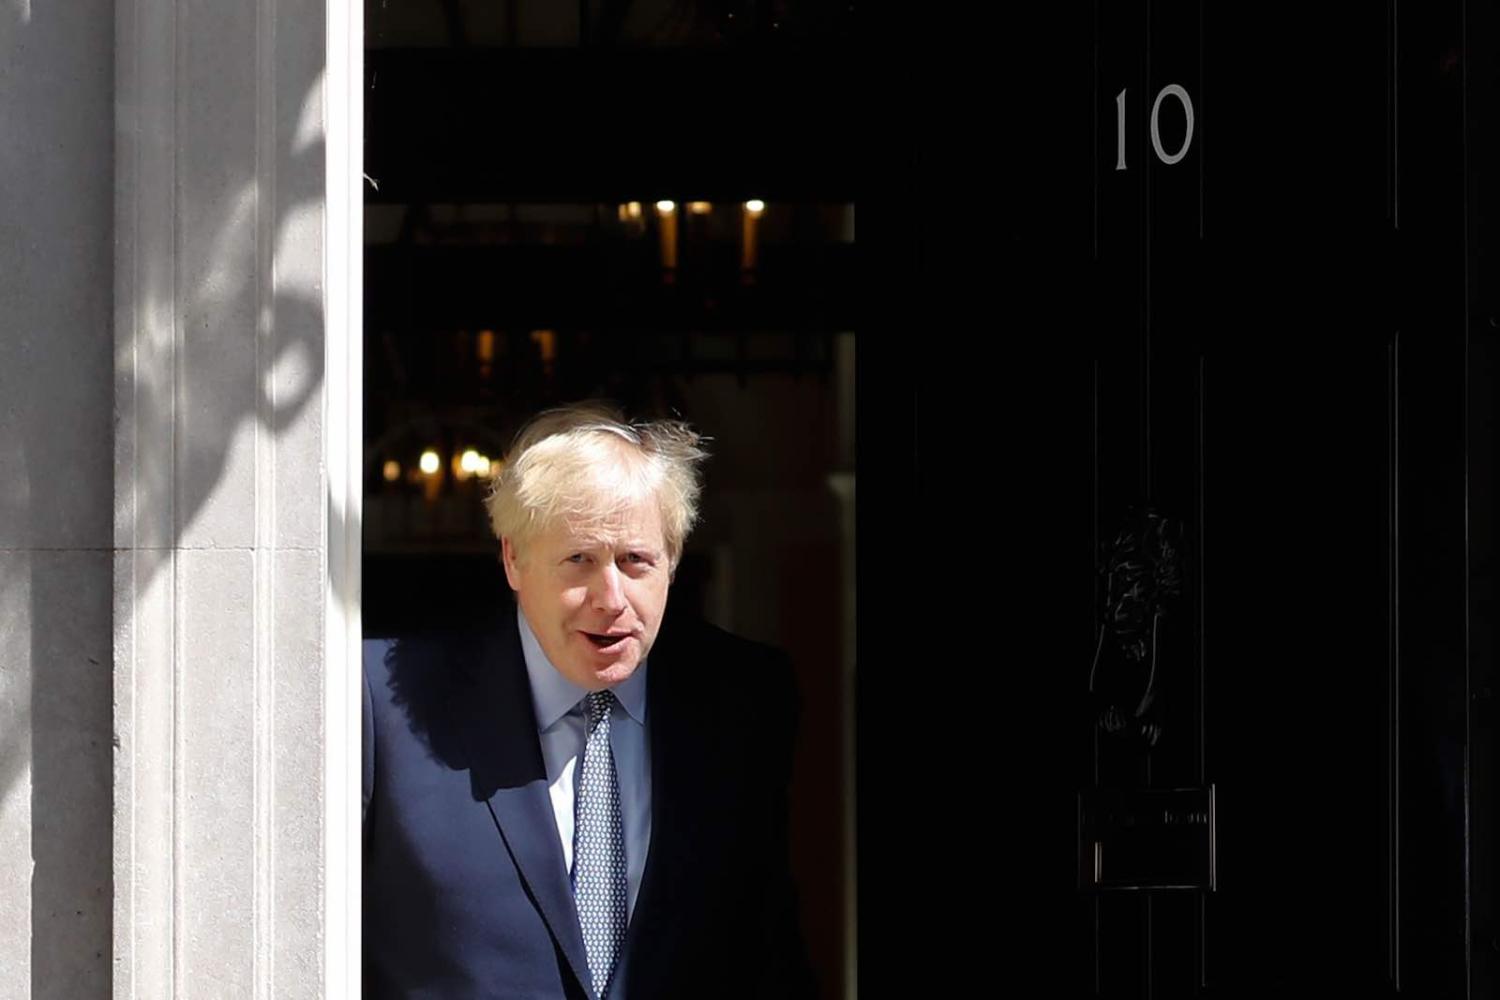 Do or die might not be the slogan Boris Johnson hoped to be remembered for (Photo: Tolga Akmen via Getty)